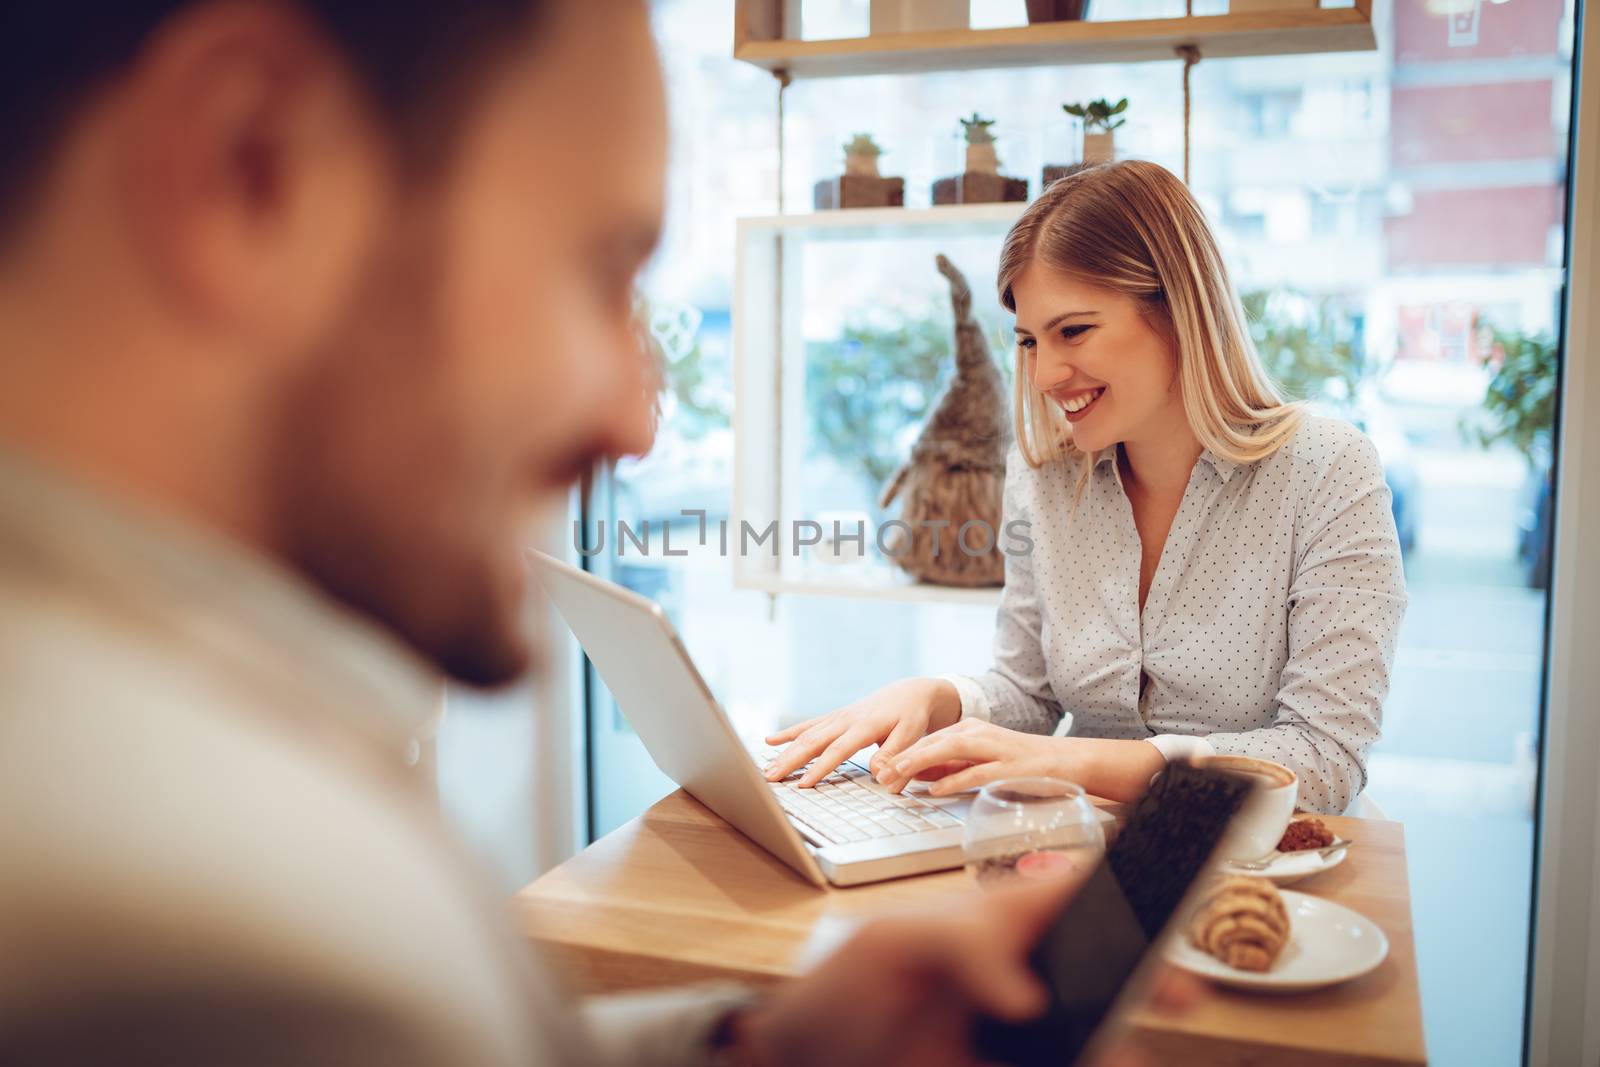 Beautiful young smiling woman working at laptop on coffee break in a cafe. Selective focus. Focus on businesswoman.